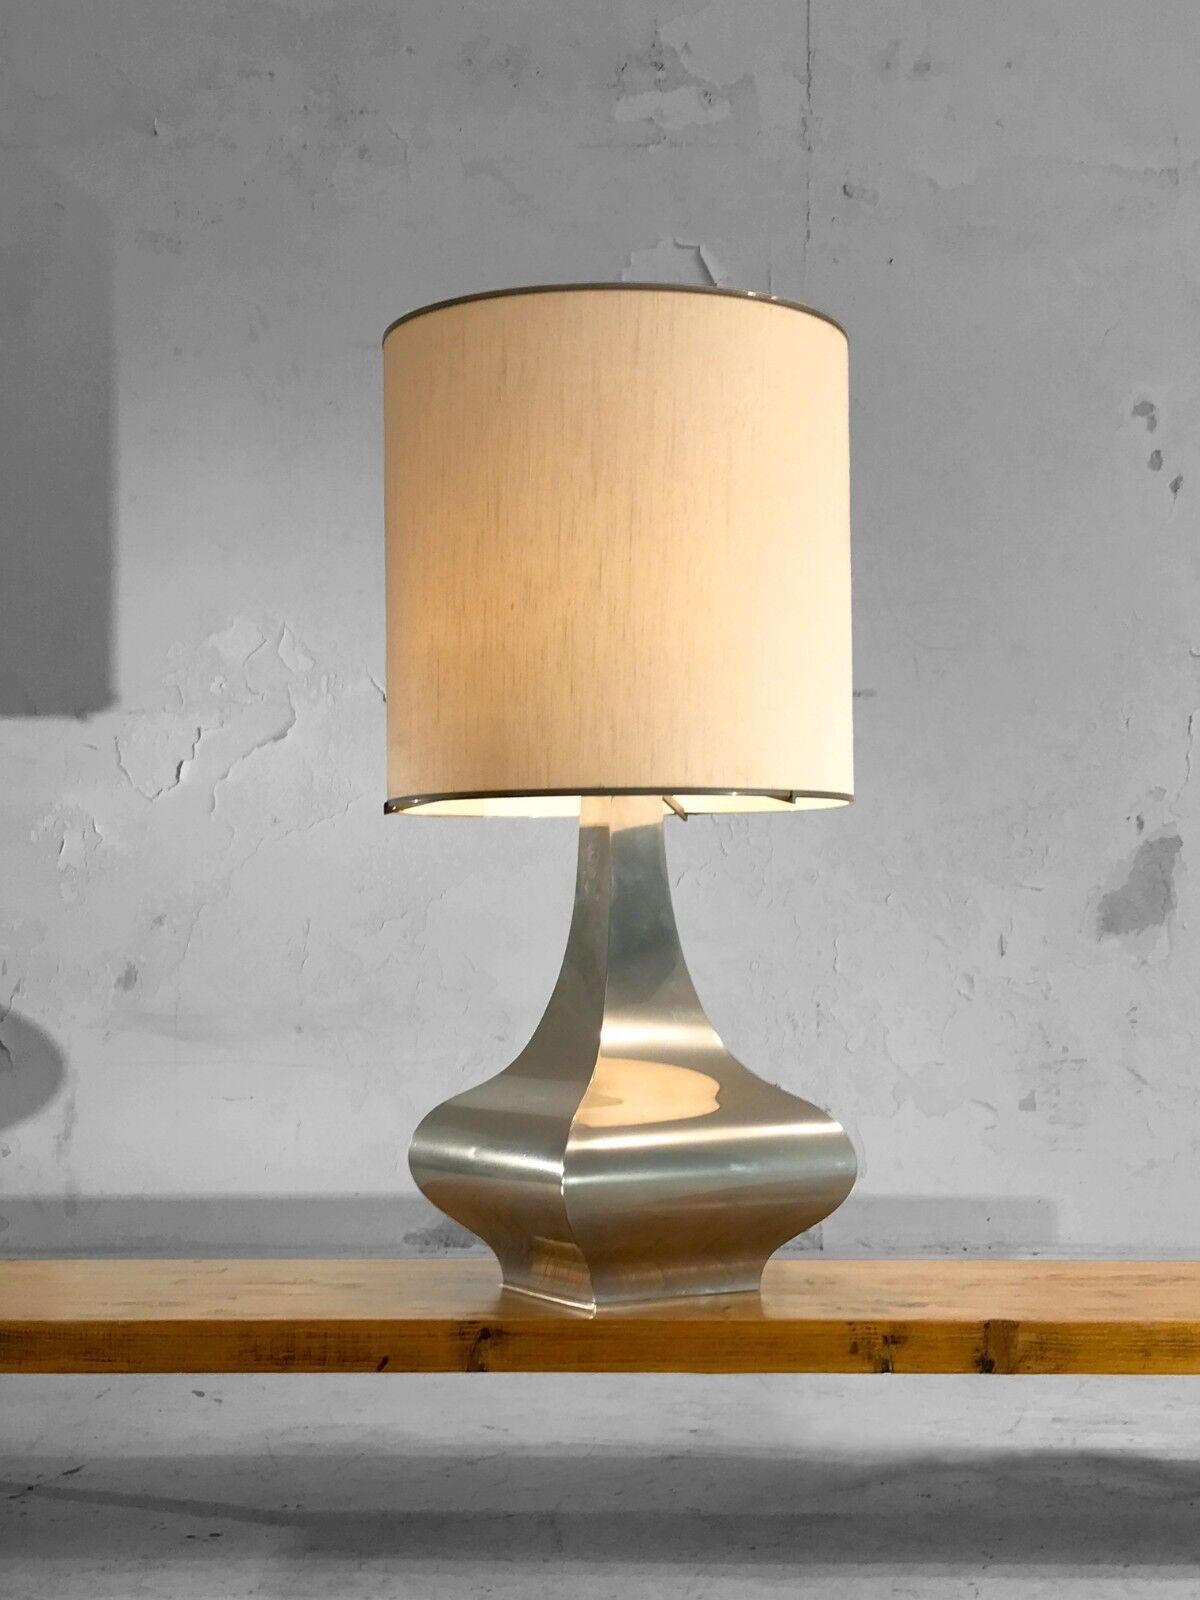 A large and luxurious freeform table or floor lamp, Post-Modernist, Space-Age, Shabby-Chic, in nickel-plated metal and original cylindrical lampshade (with nickel-plated frames) in wild silk, strongly remembering a Maria Pergay model, attributed to